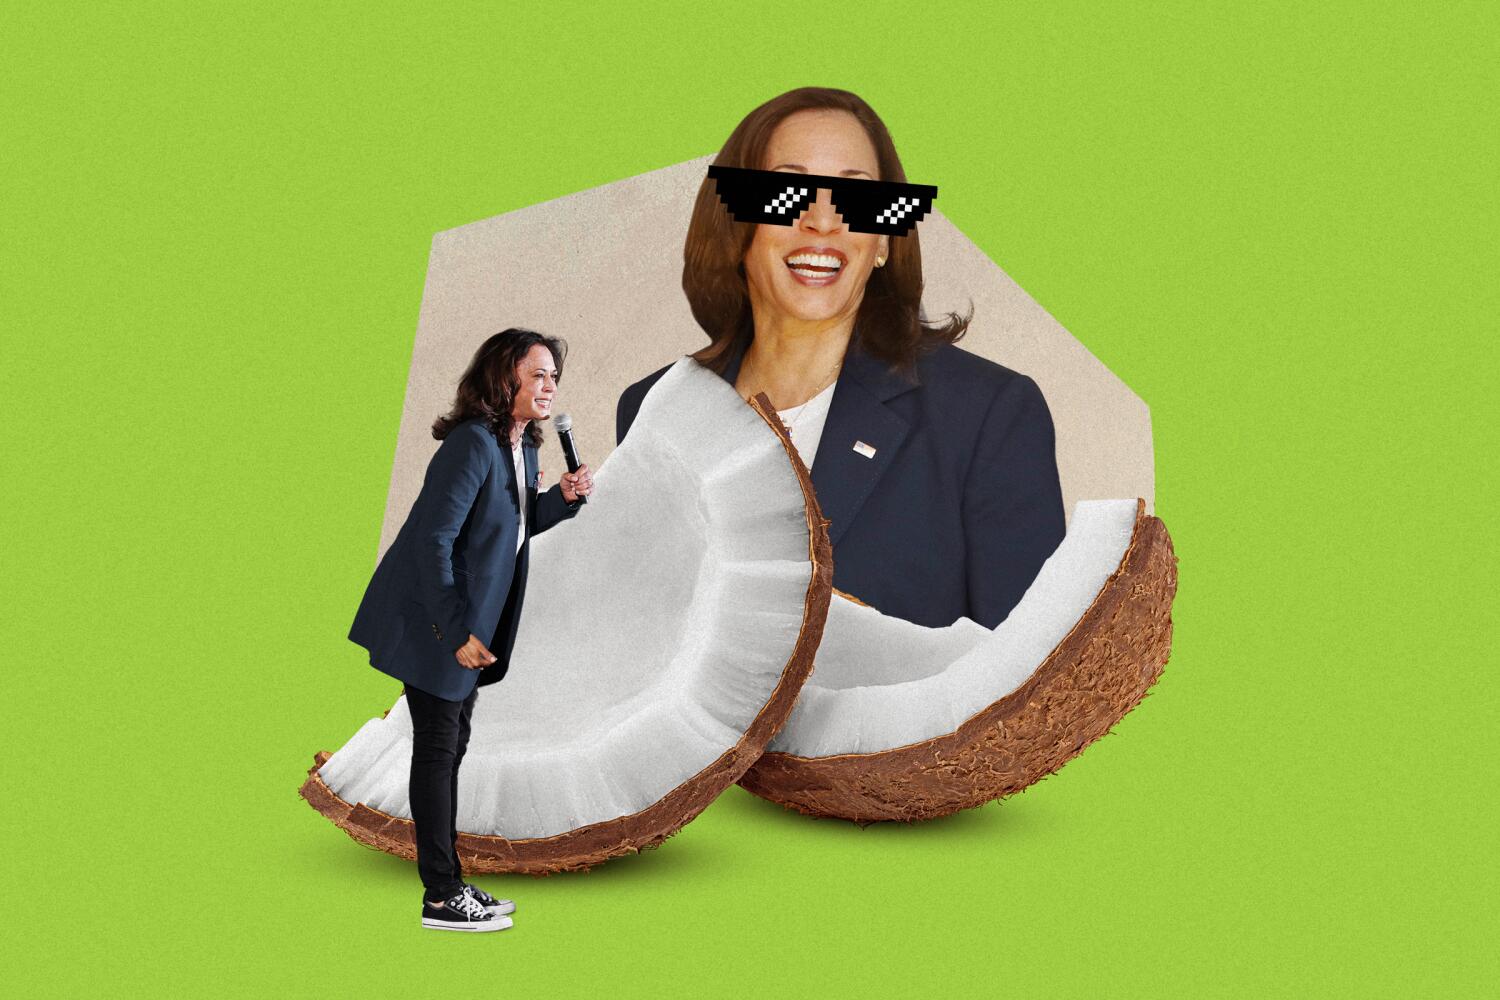 Coconuts, 'brat summer' and that laugh: The memeing of Kamala Harris